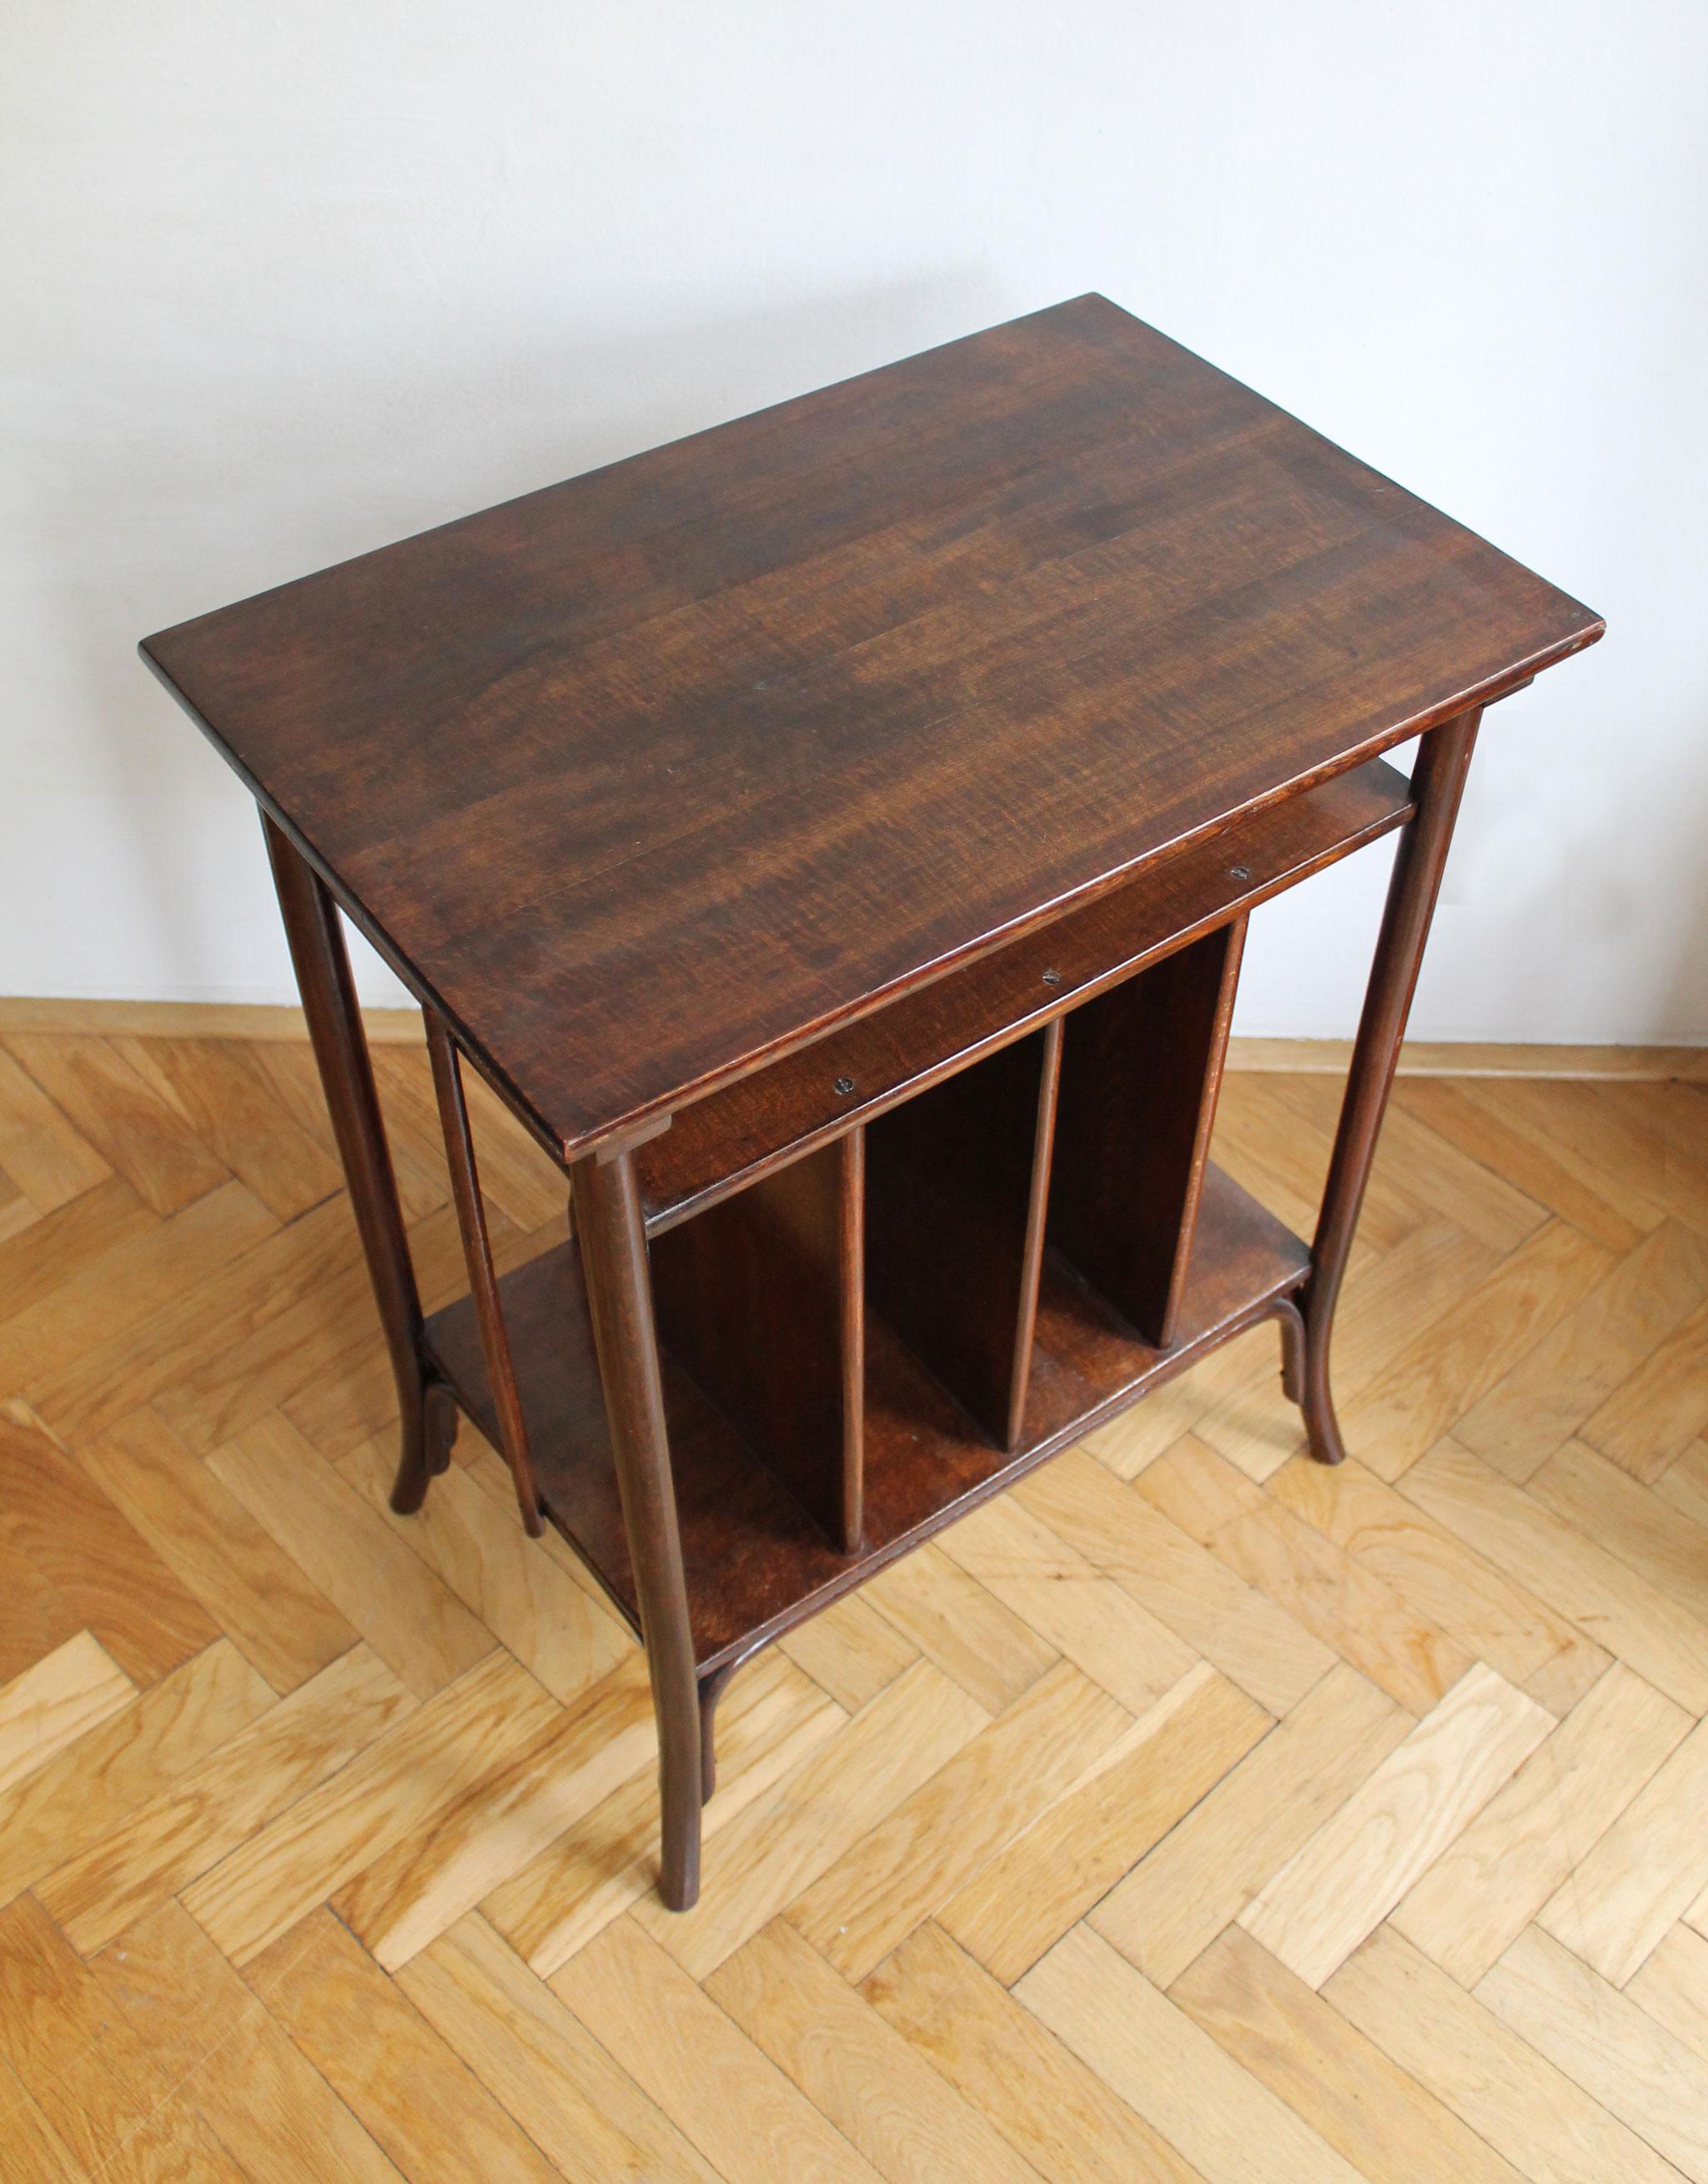 1910's Art Nouveau Table by Gebrüder Thonet In Good Condition For Sale In Brno, CZ